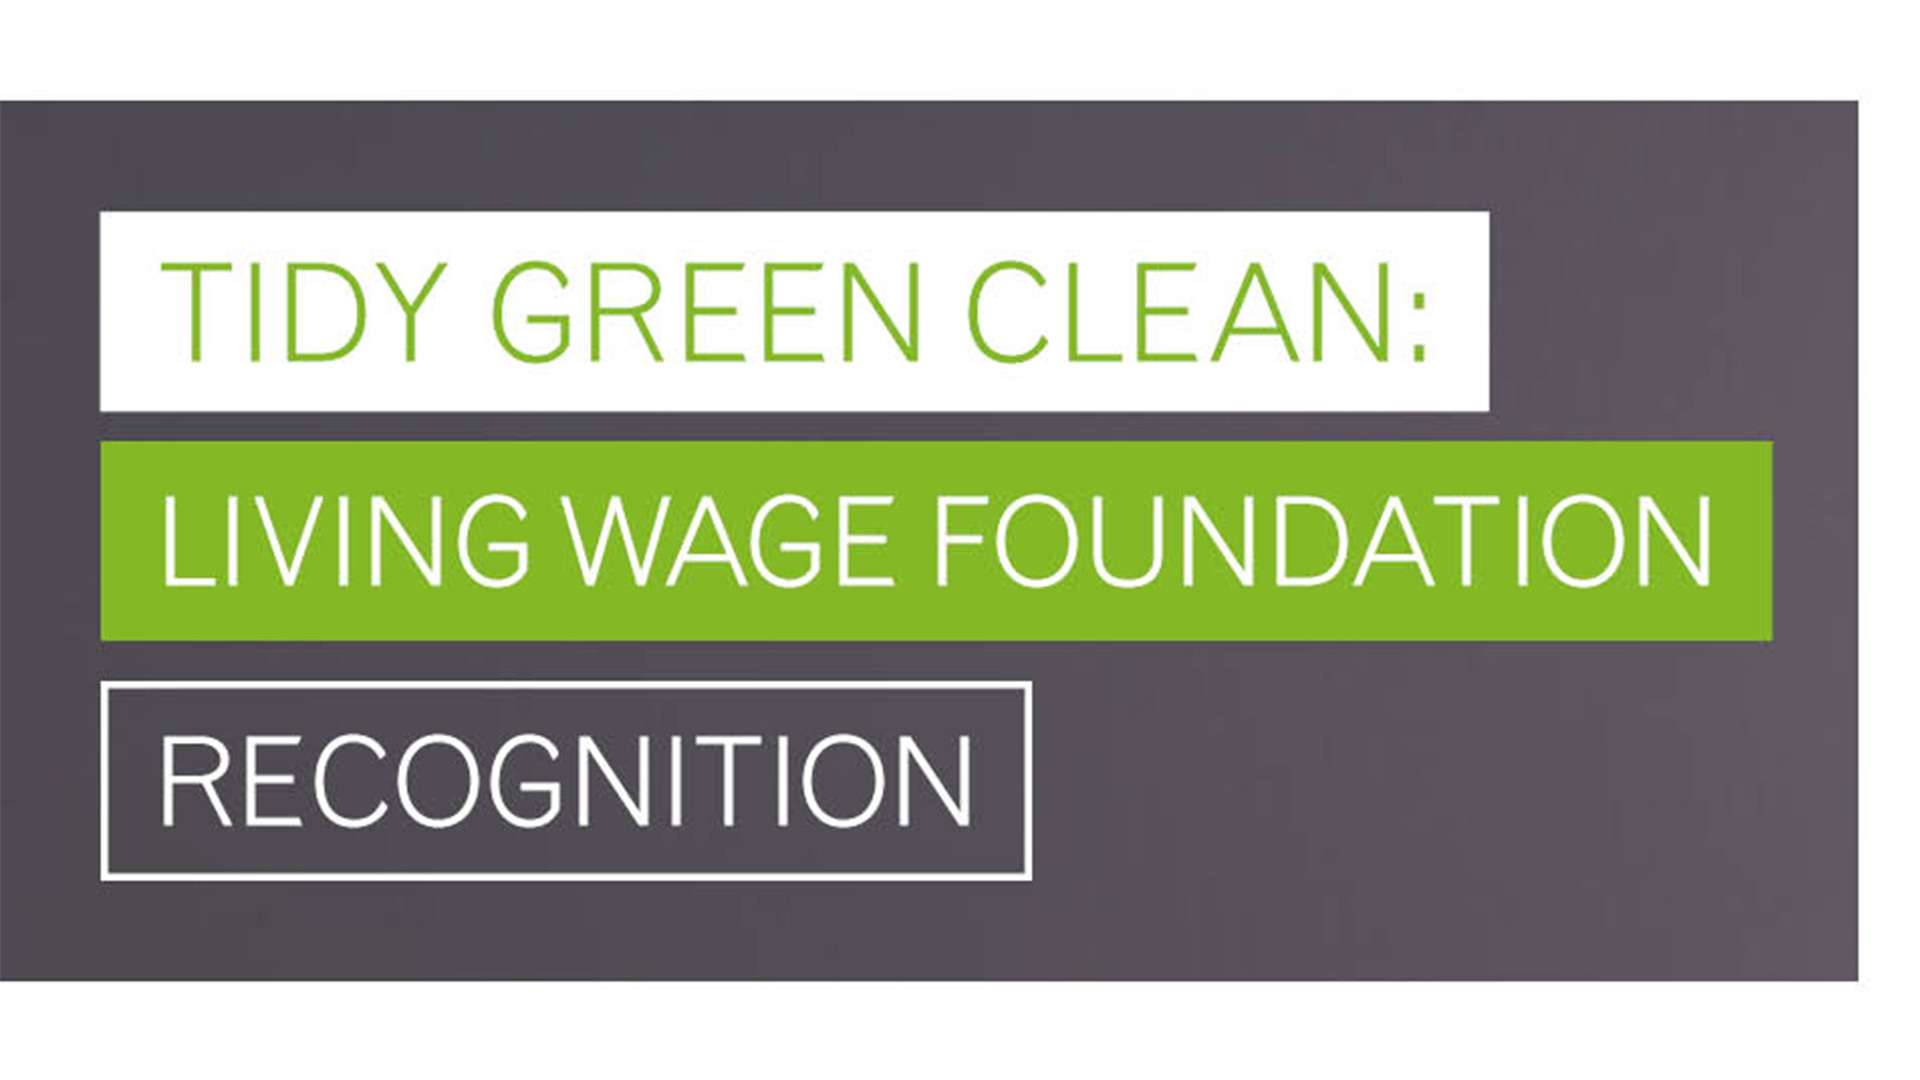 Logo of Tidy Green Clean with Living Wage Foundation recognition